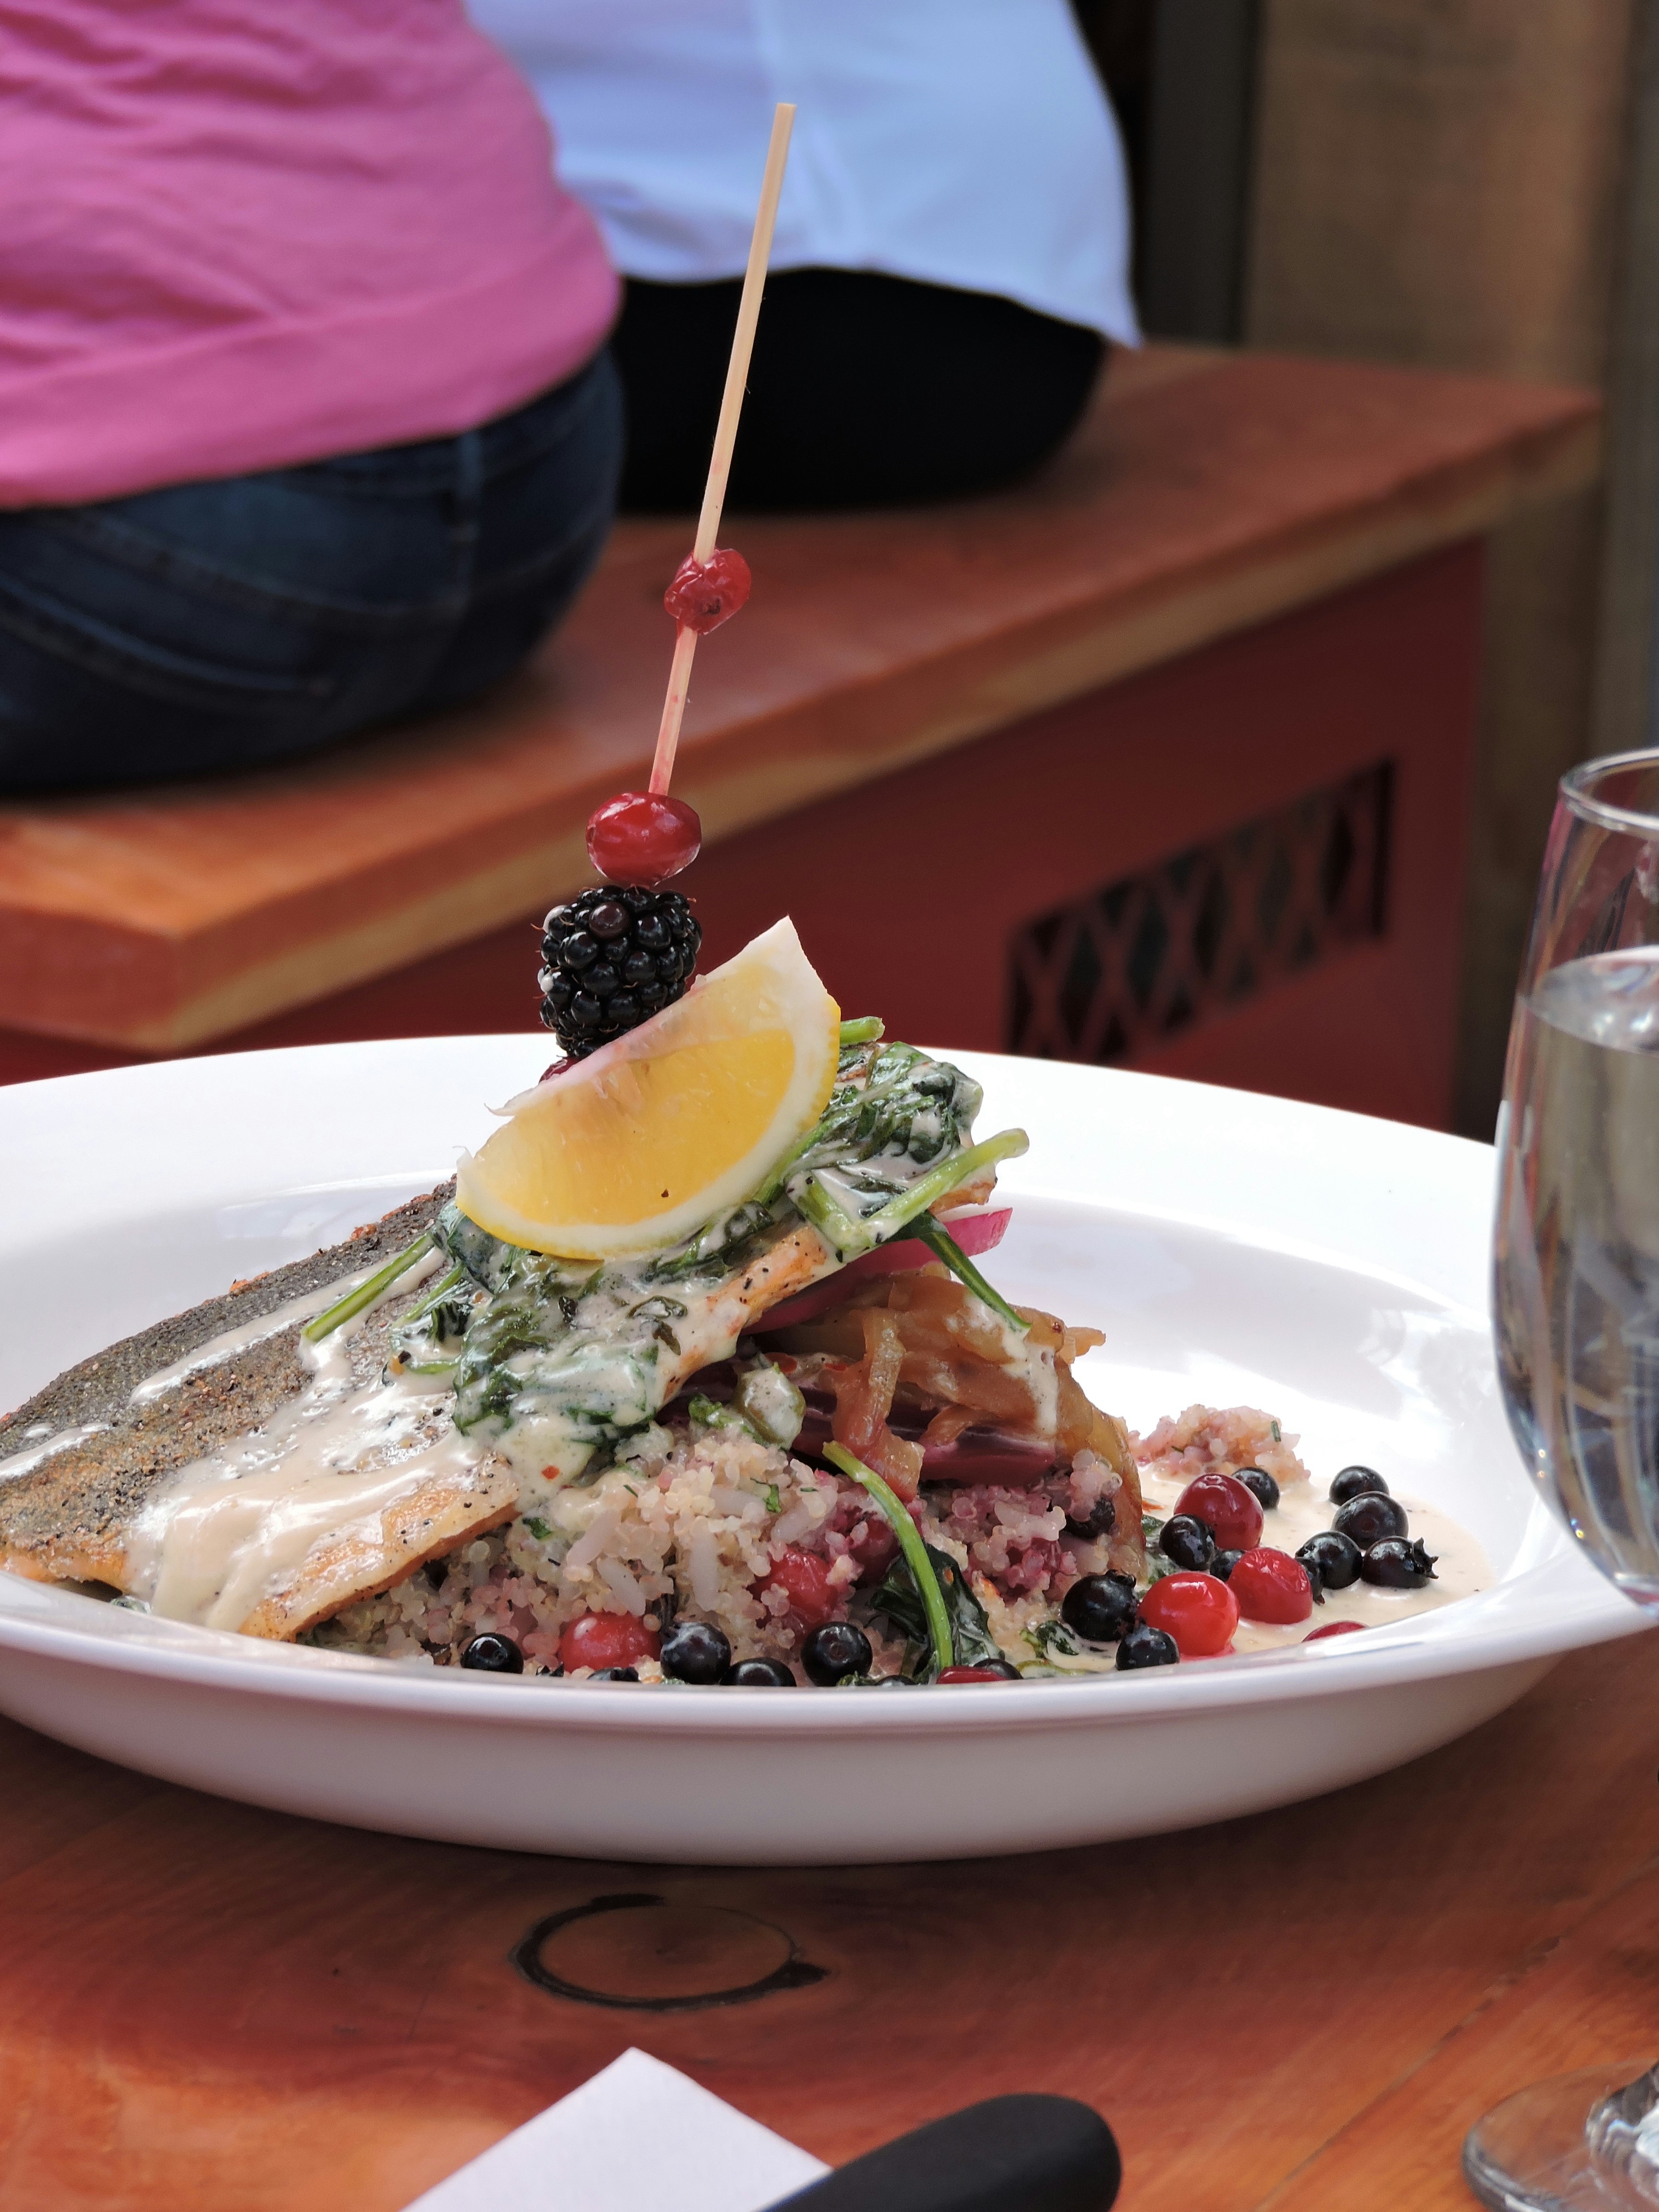 A piece of salmon, pierced by a wooden stick with a lemon slice and berries, lies in a bed of rice mixed with berries; Indigenous food 